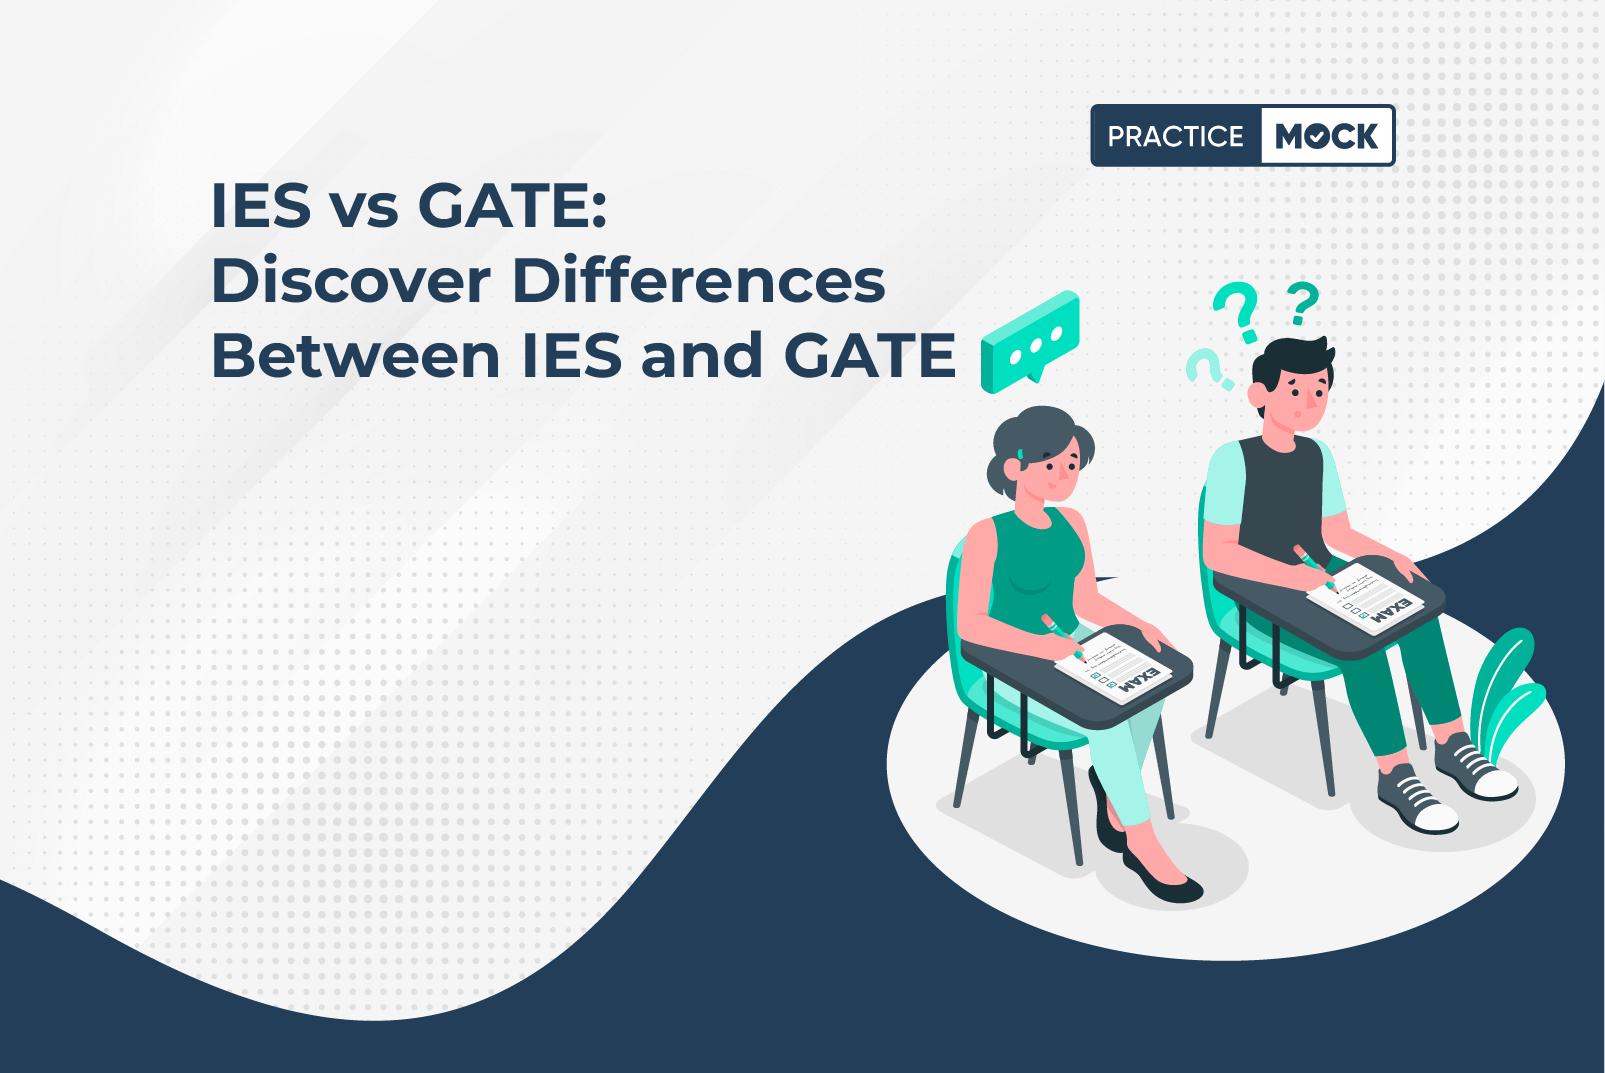 IES vs GATE: Discover Differences Between IES and GATE